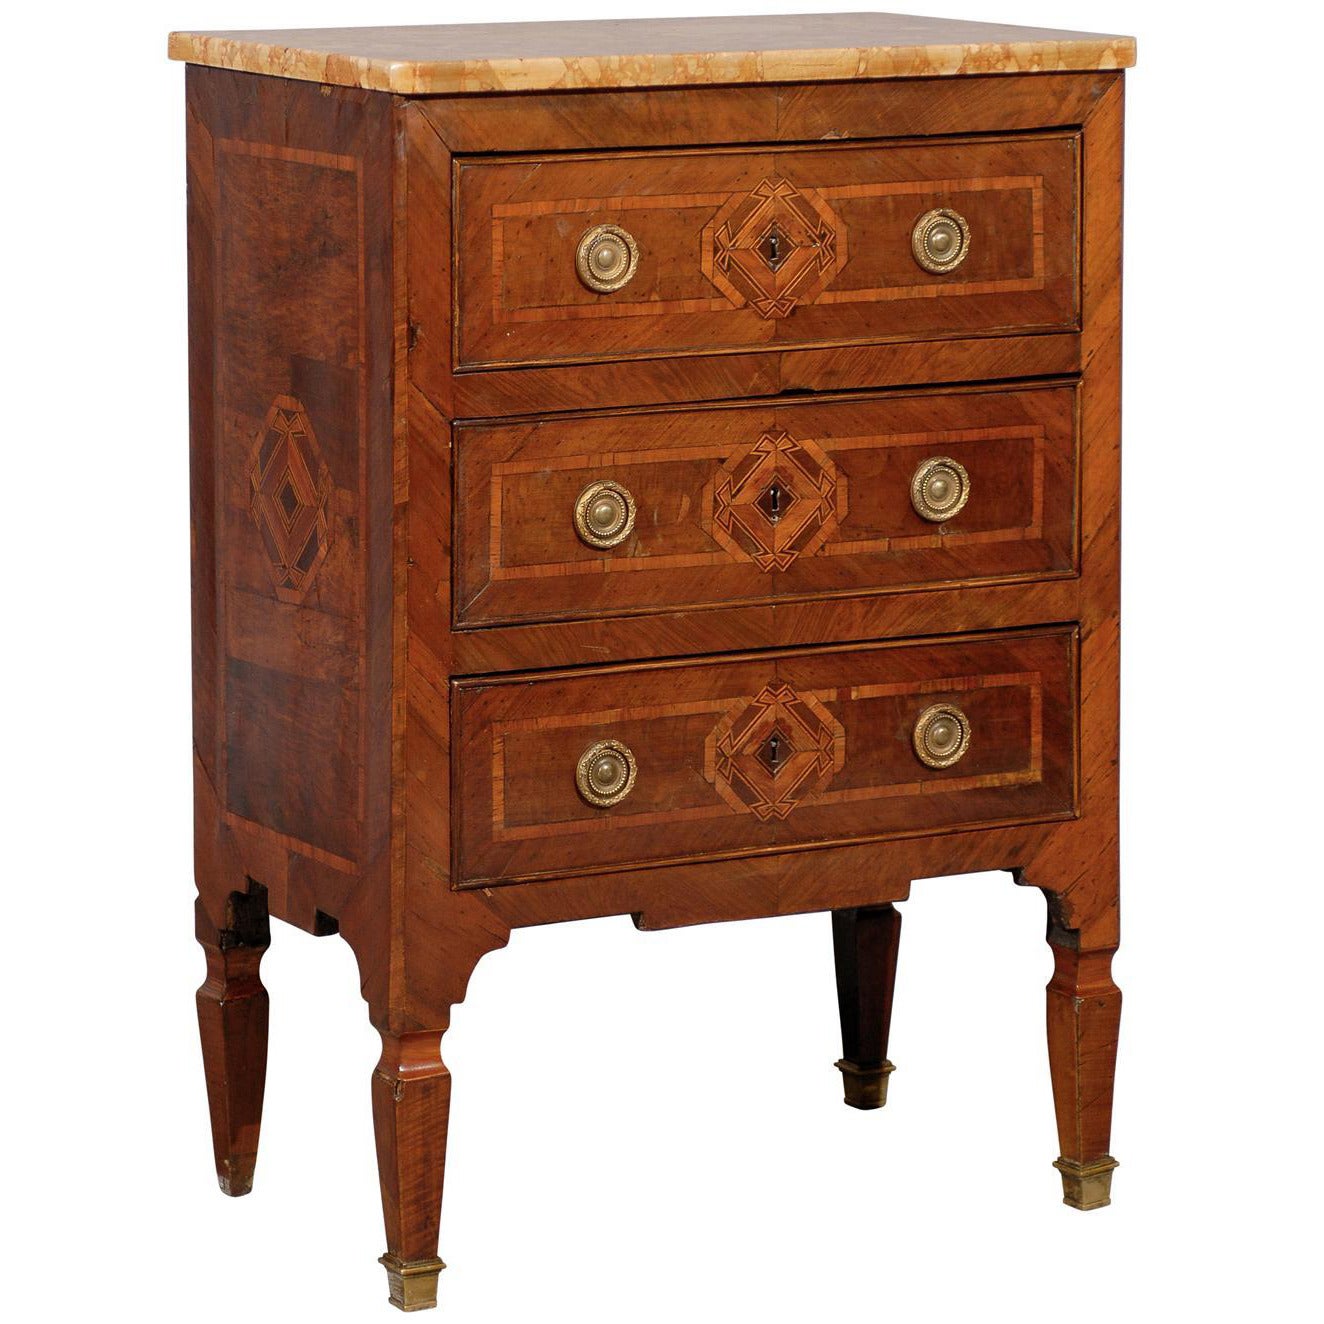 Italian Neoclassical Parquetry Inlaid Commodini with Marble Top